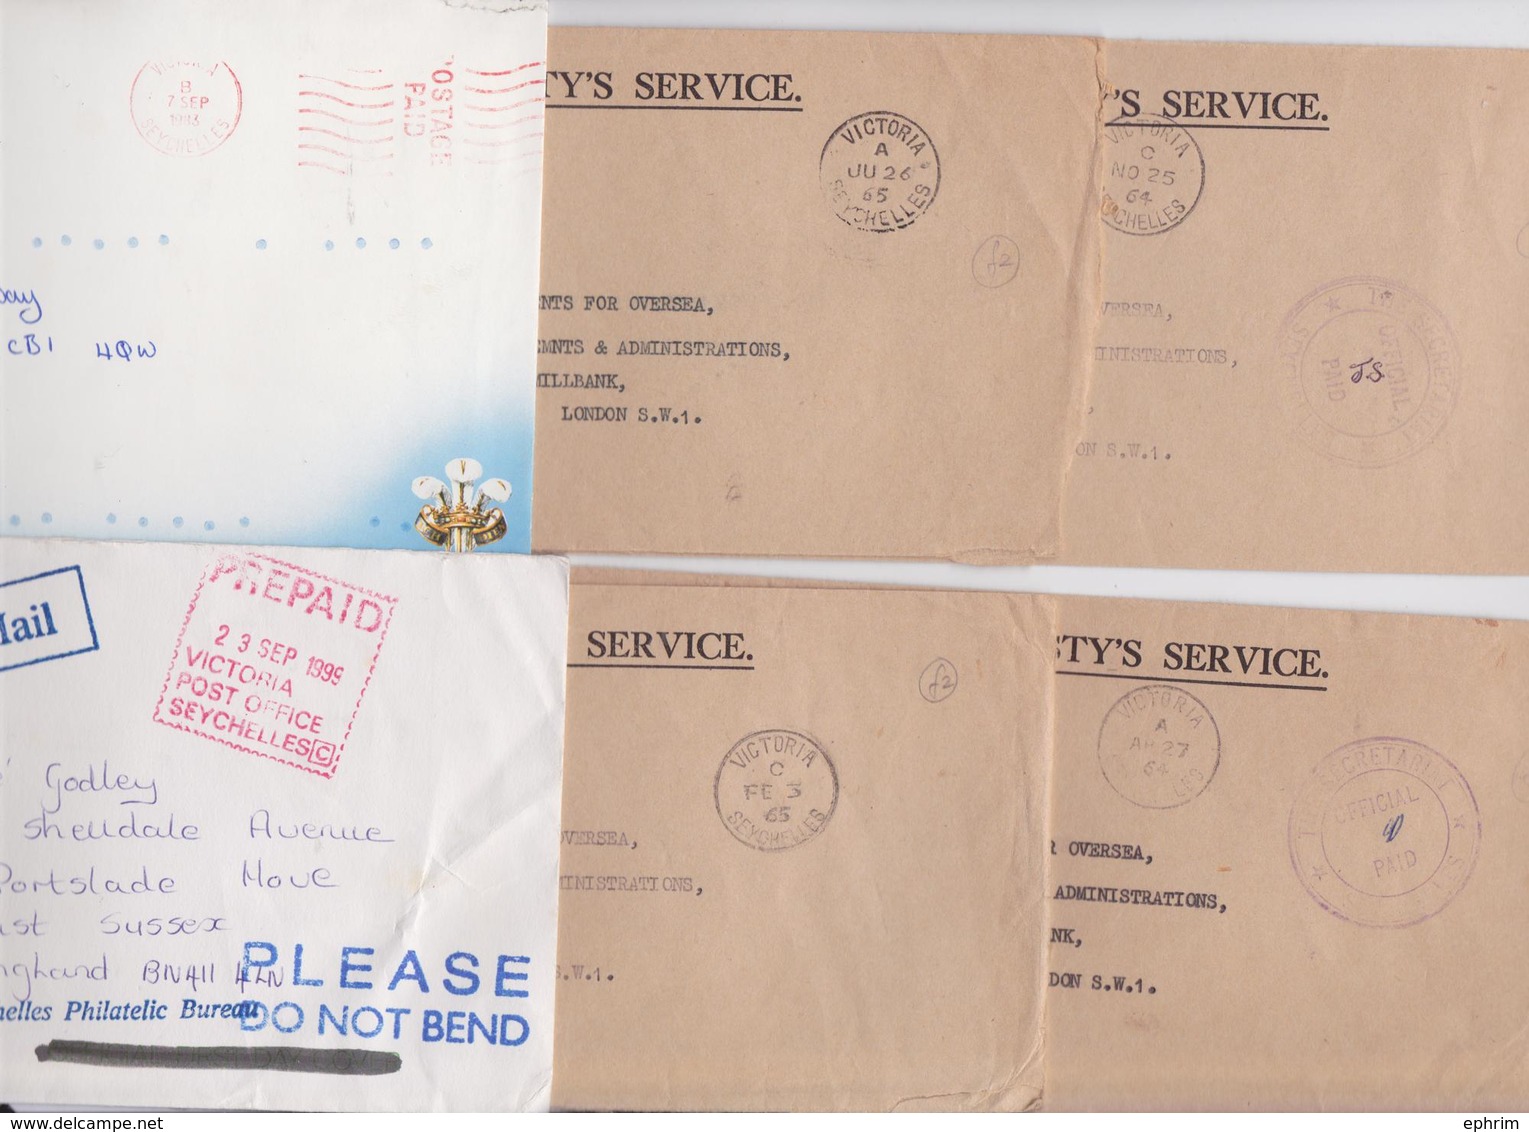 SEYCHELLES VICTORIA POSTAGE PAID LOT OF 17 MAIL COVERS PRE PAID COVER ENVELOPPES PORT PAYE PP FRANKING POST MARK - Seychelles (1976-...)